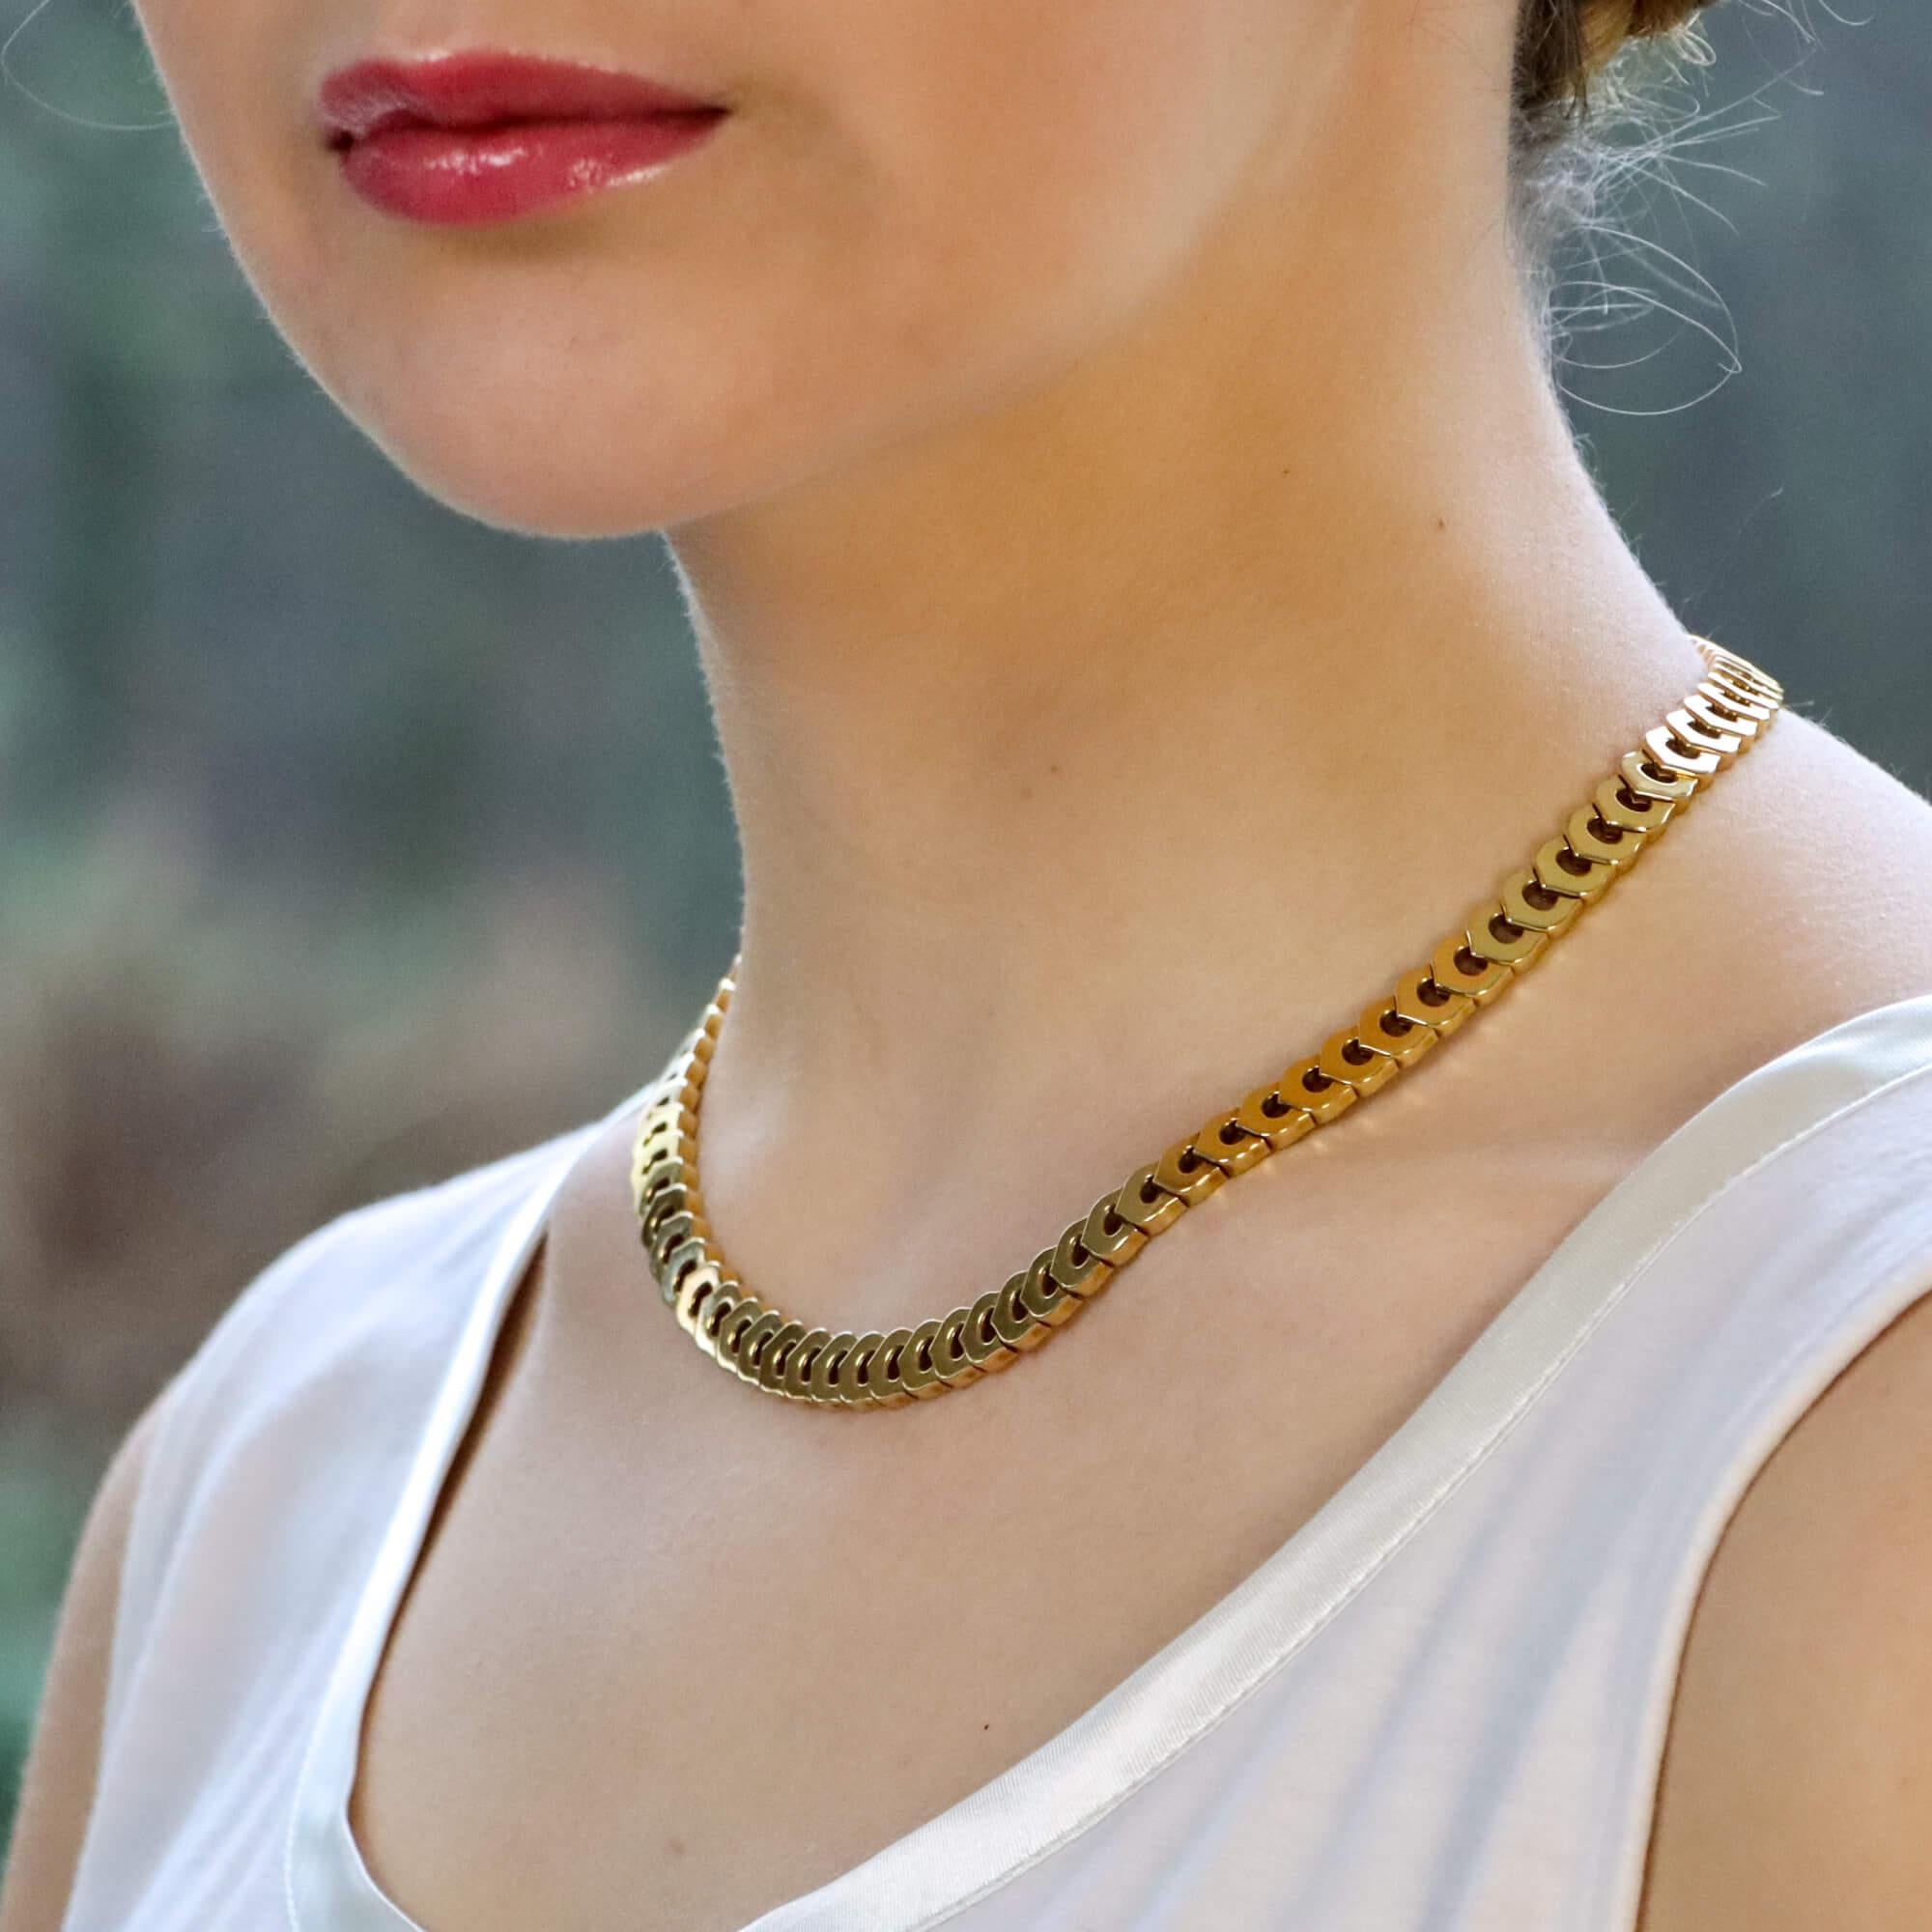 A beautiful C de Cartier link necklace made of solid 18k yellow gold.

The necklace is composed of exactly 84 iconic Cartier C links and sits beautifully once on the neck. Due to the design of the necklace it could easily be worn by itself as a